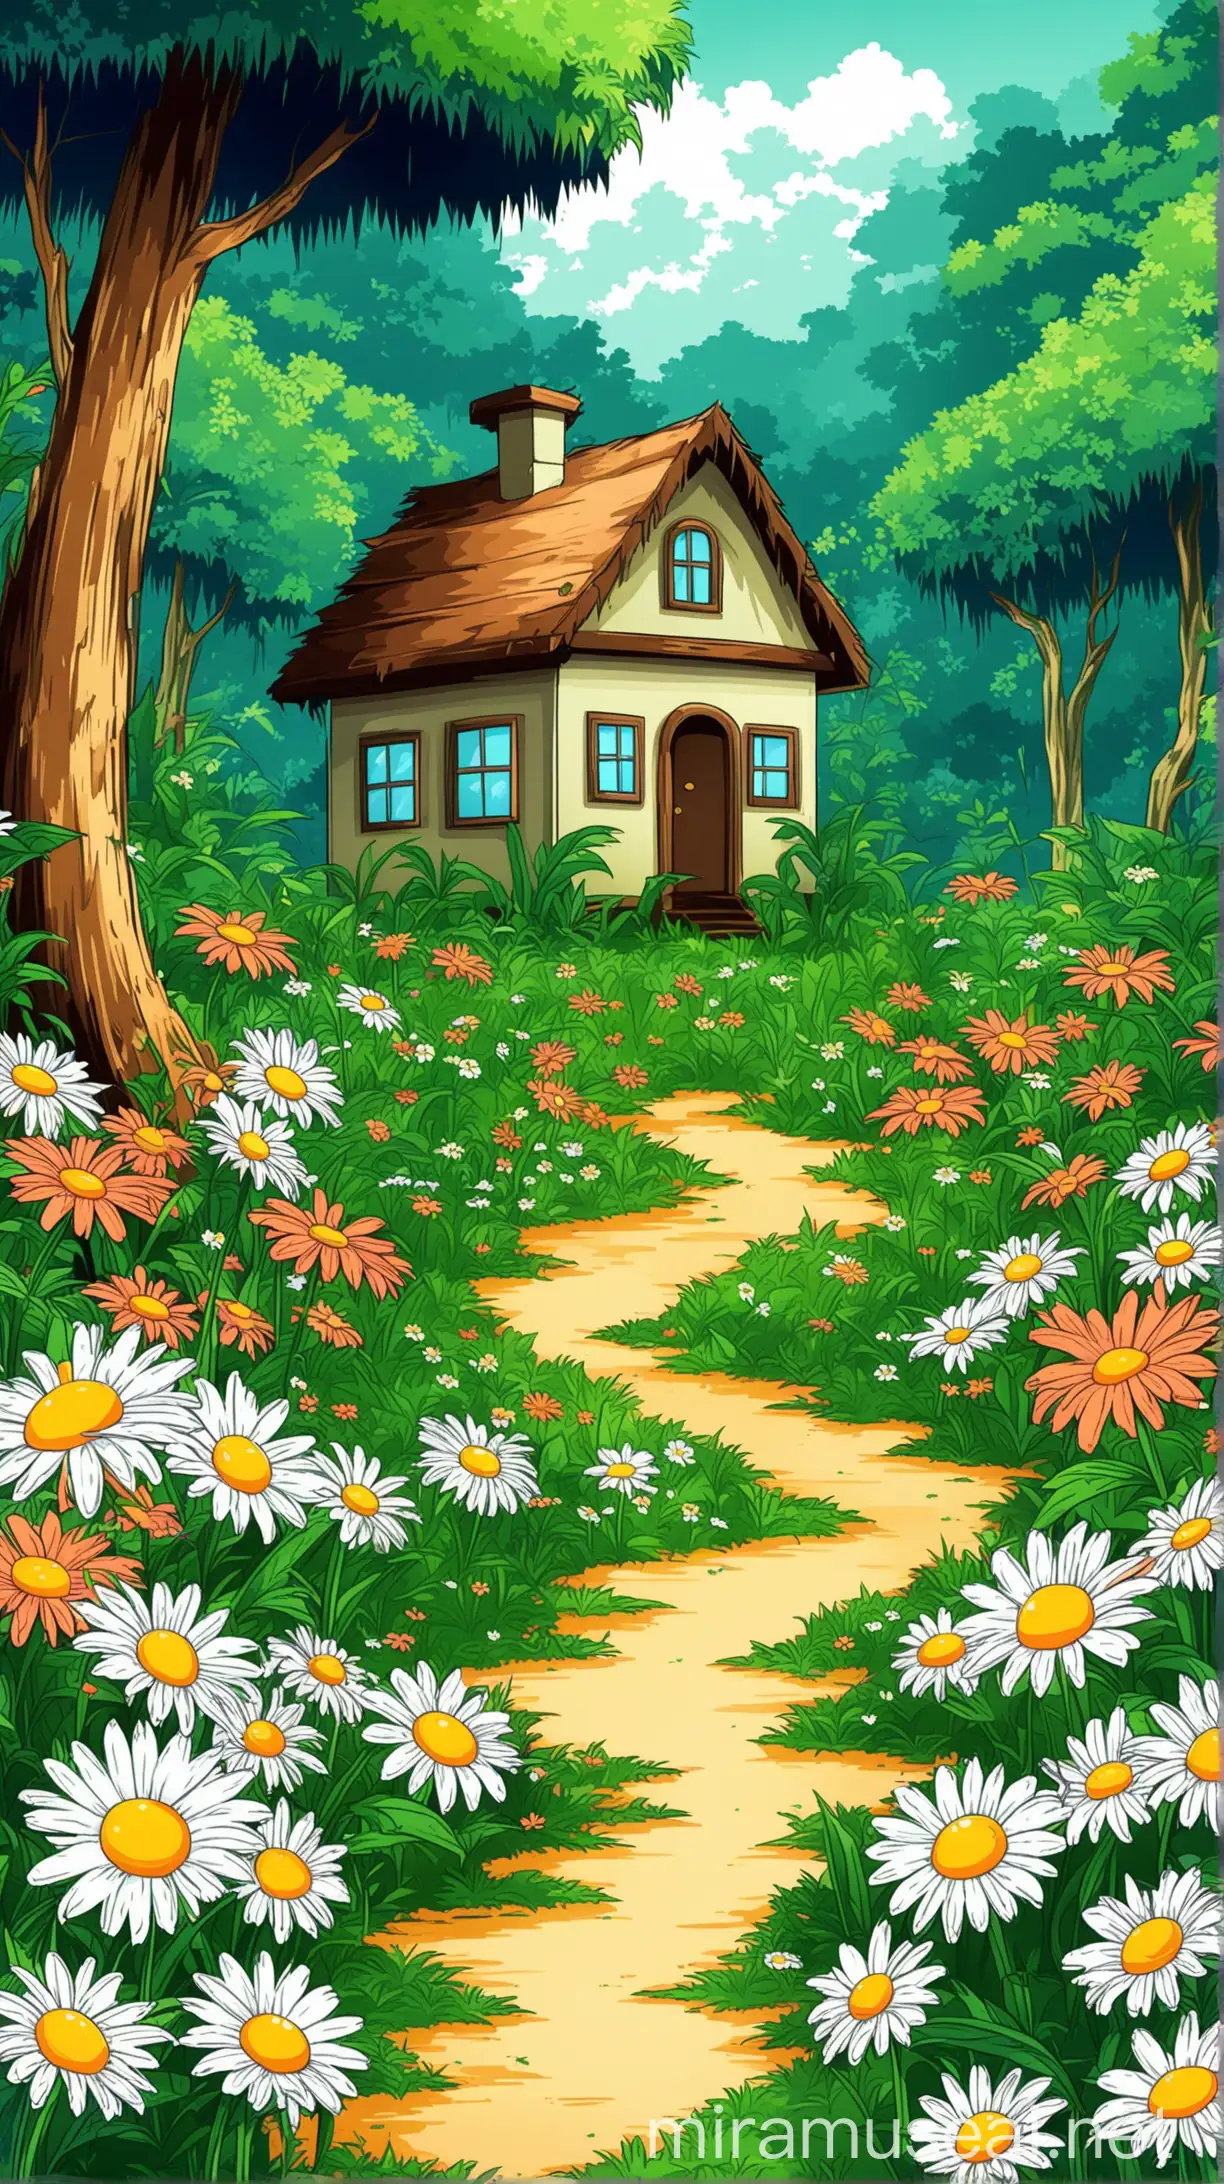 Charming Small House Amidst Enchanting Jungle with Daisy Garden Anime Style Vector Wallpaper